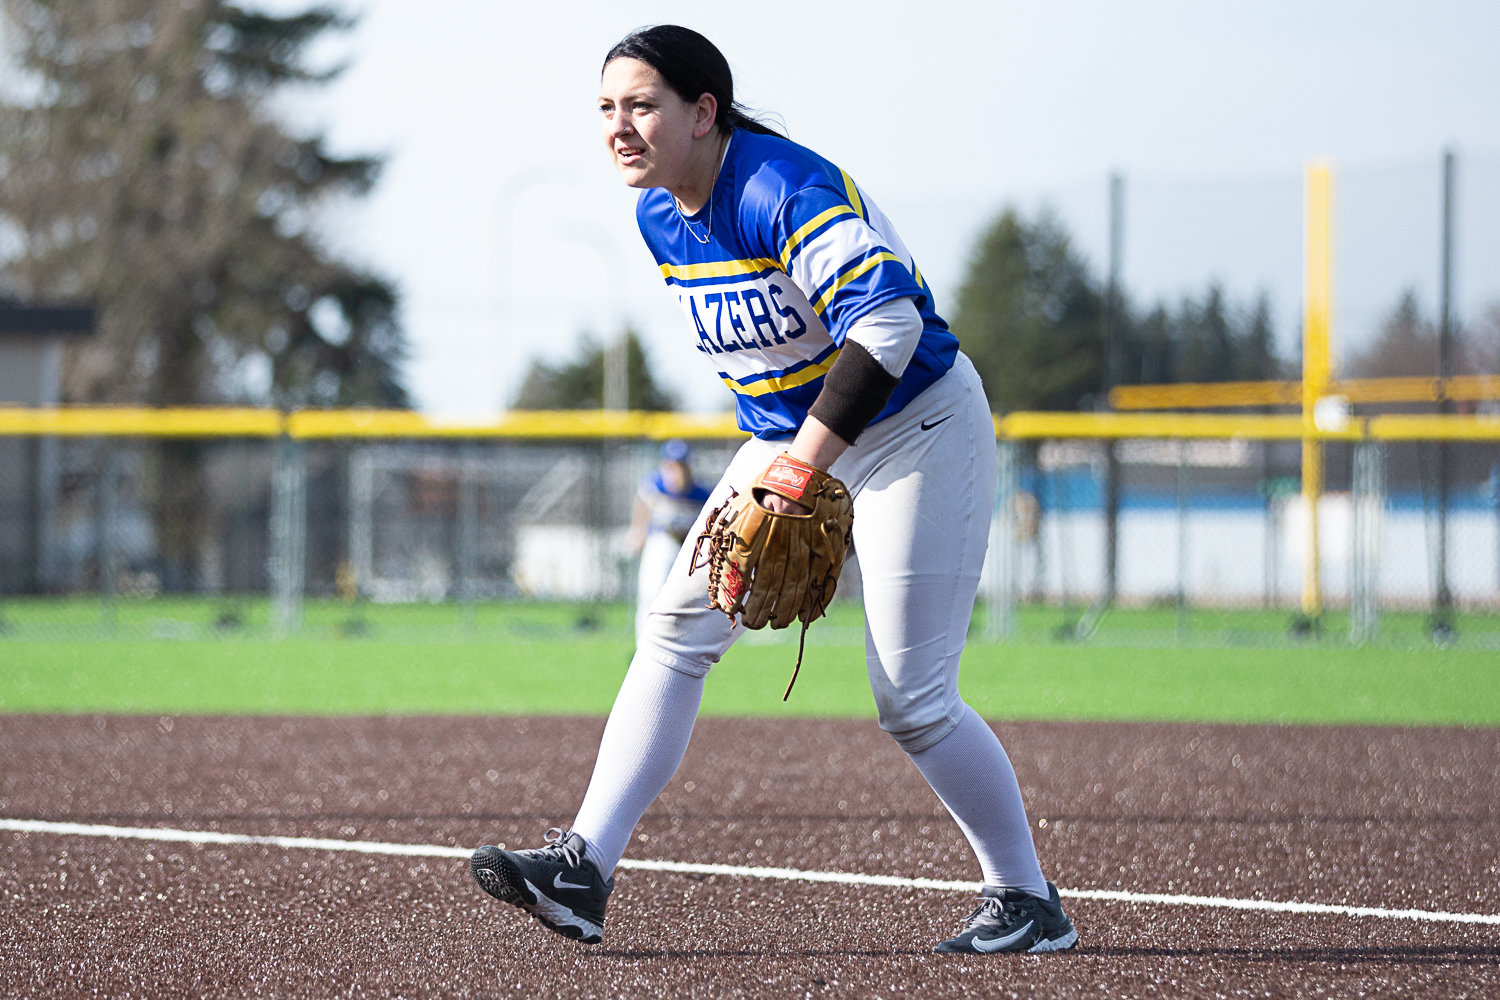 Centralia College first baseman Kaylee Ashley gets ready before a pitch against Clark in Centralia March 17.